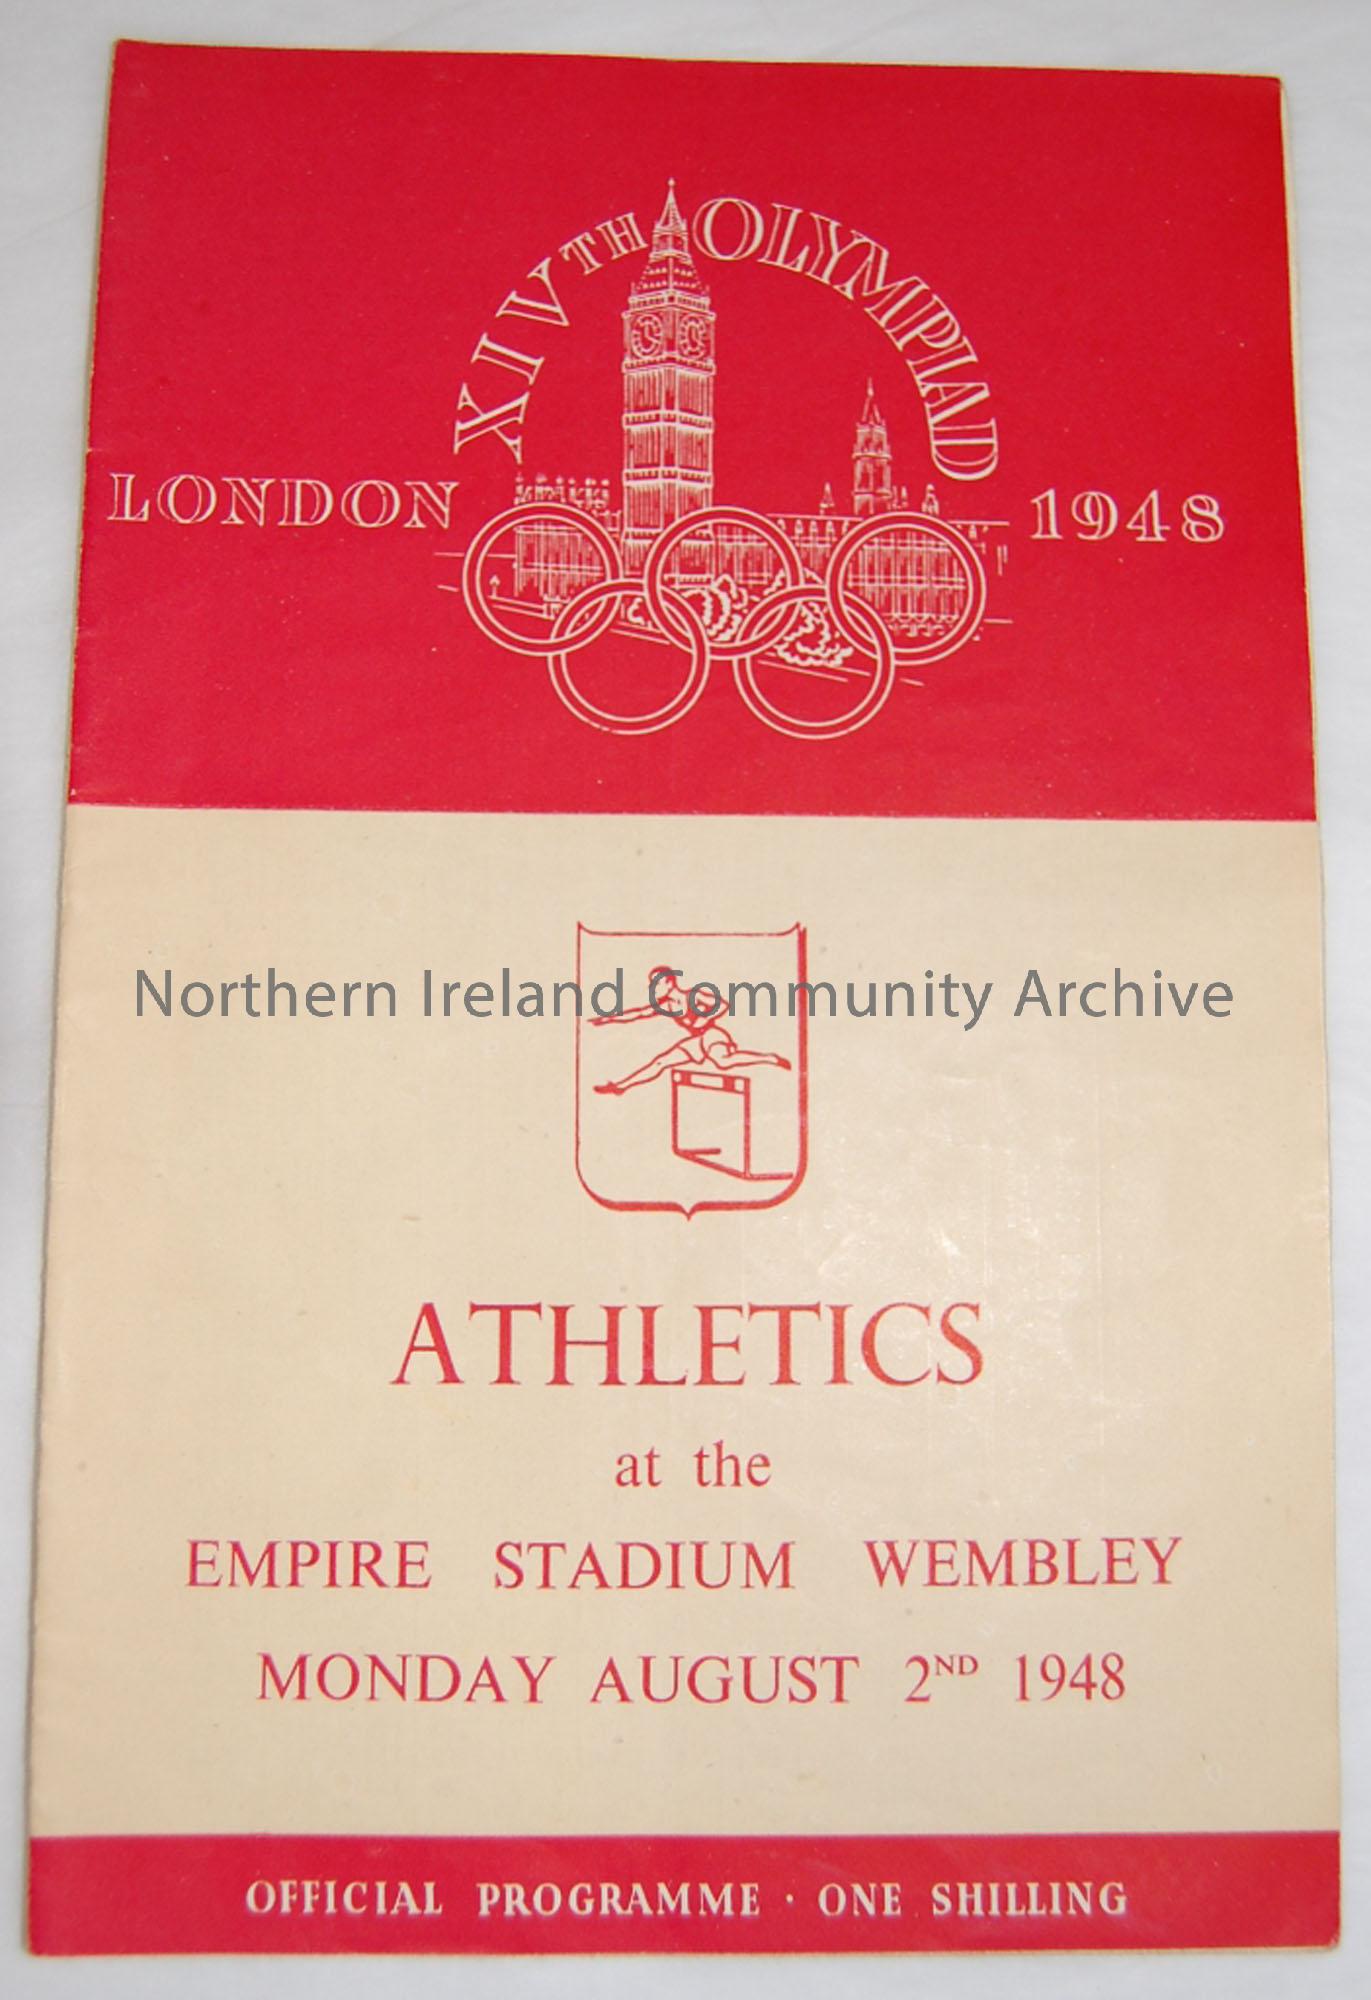 Athletics Programme from London Olympics, Empire Stadium Wembley, Monday August 2nd 1948. Illustrations include Olympic Rings and Houses of Parliament